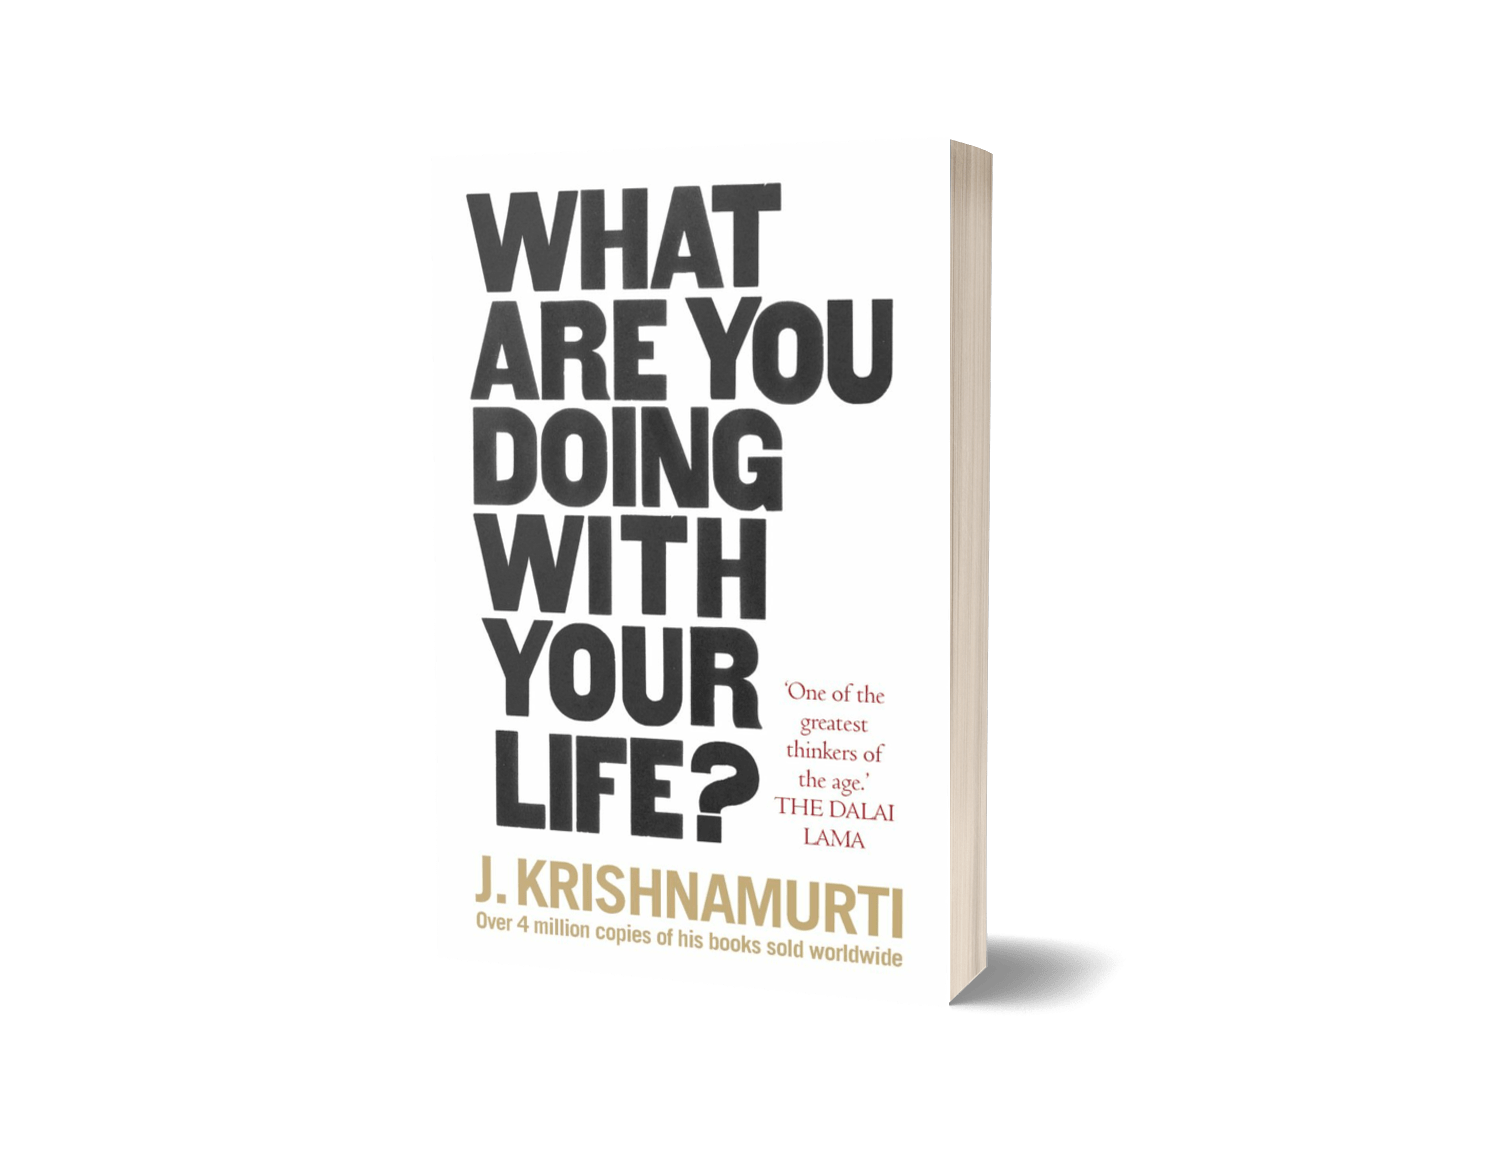 What Are You Doing With Your Life? by J. Krishnamurti